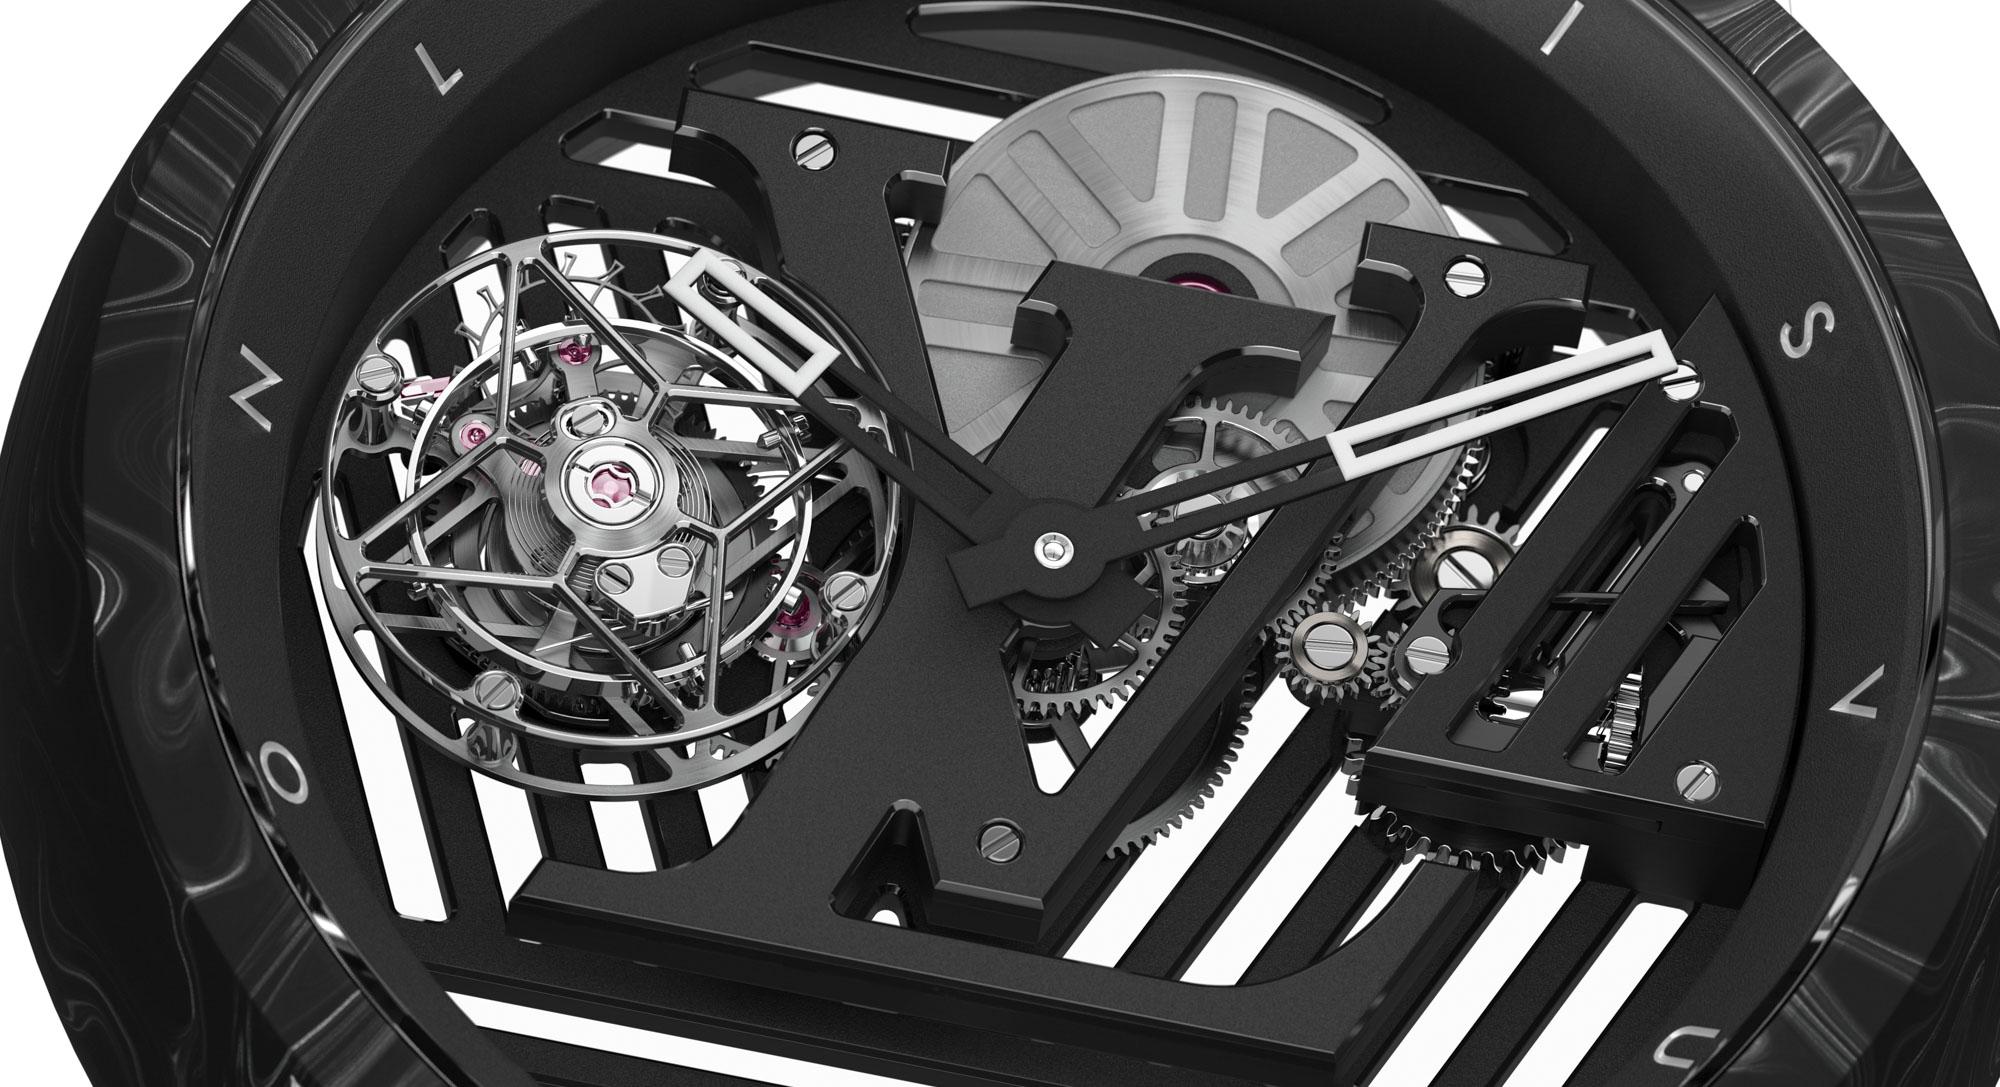 Escale Spin Time, Reference Q5EG3, A white gold, titanium, diamond and  multi-coloured gem-set wristwatch with time displayed by 12 rotating cubes,  Circa 2018, 路易威登, Escale Spin Time 型號Q5EG3